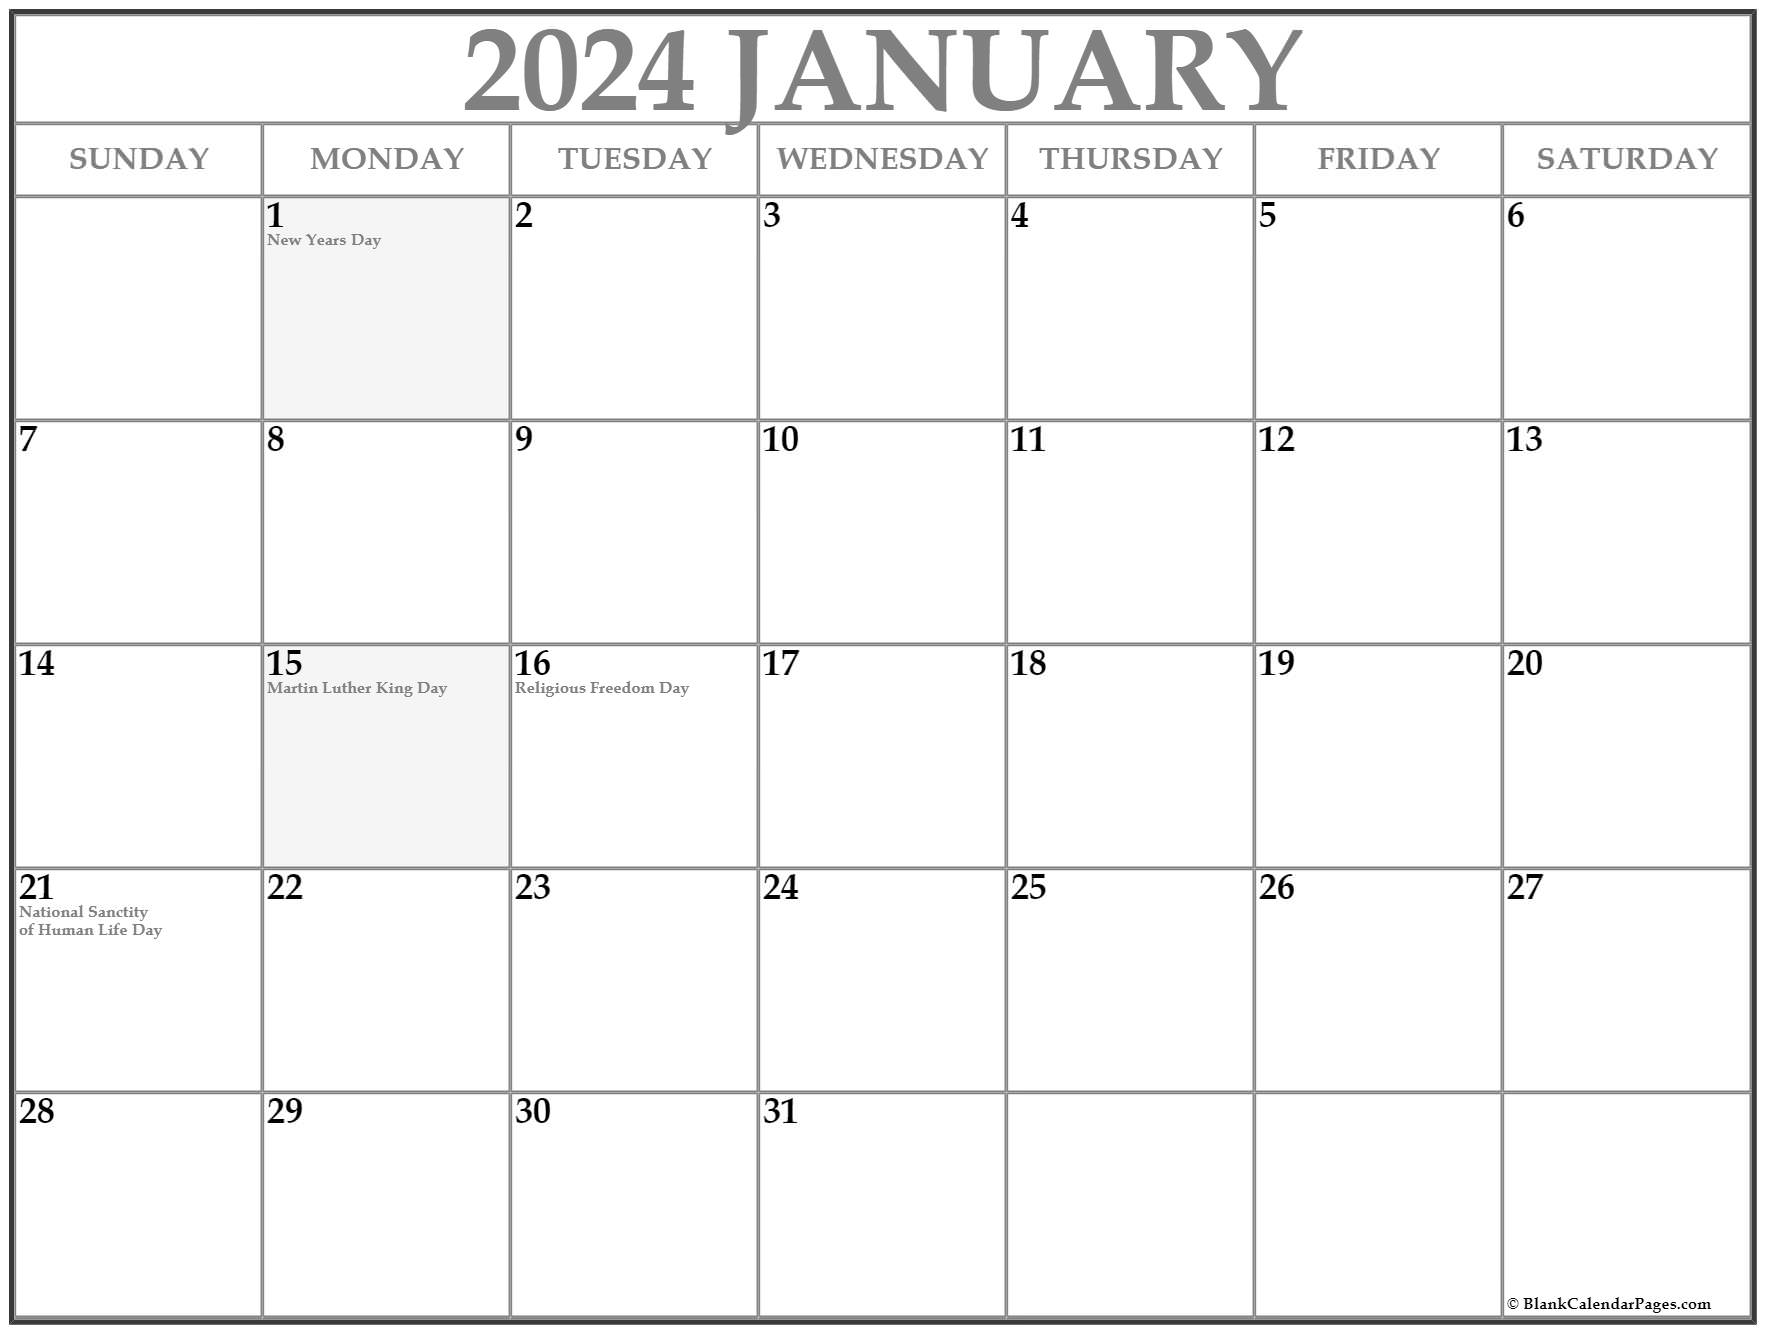 Collection Of January 2020 Calendars With Holidays